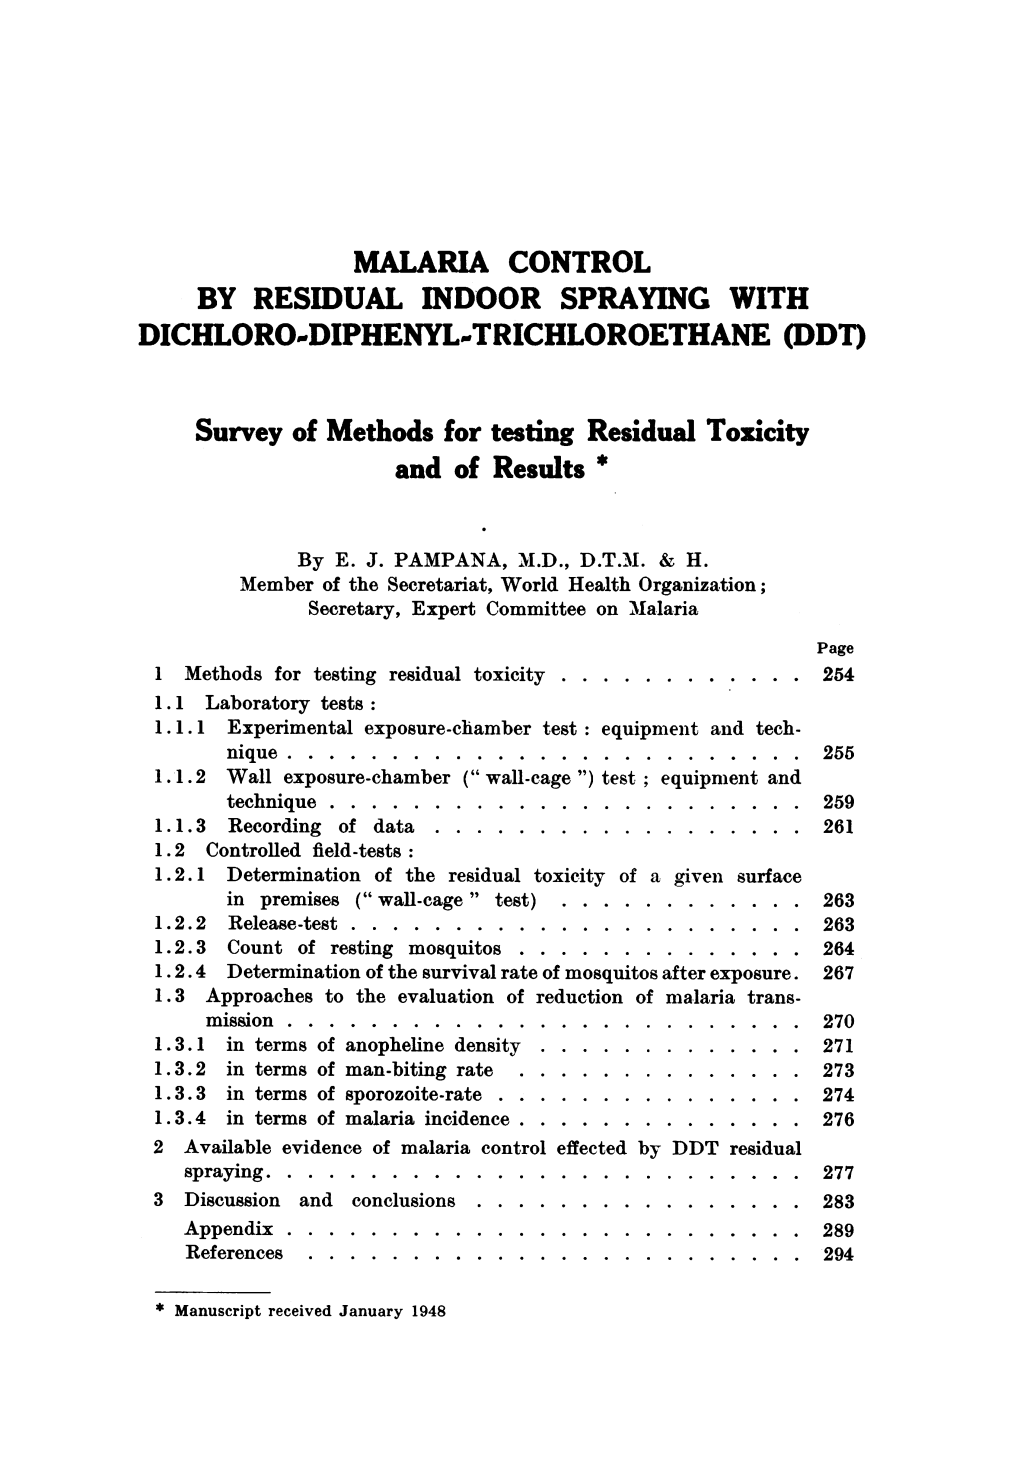 (DDT) Survey of Methods for Testing Residual Toxicity